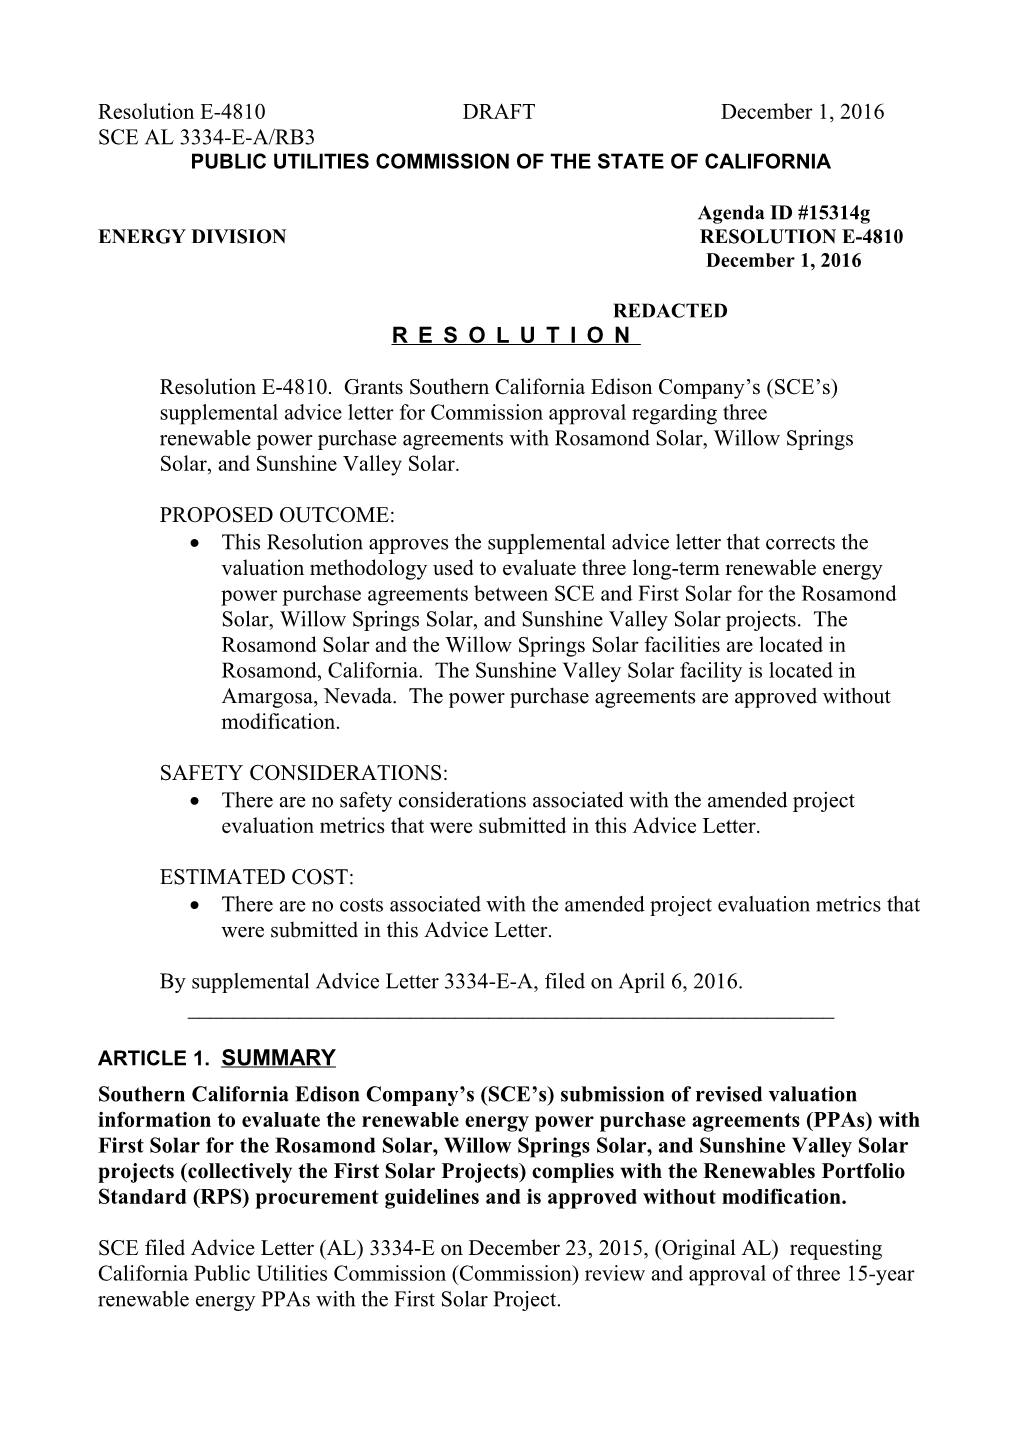 Public Utilities Commission of the State of California s58